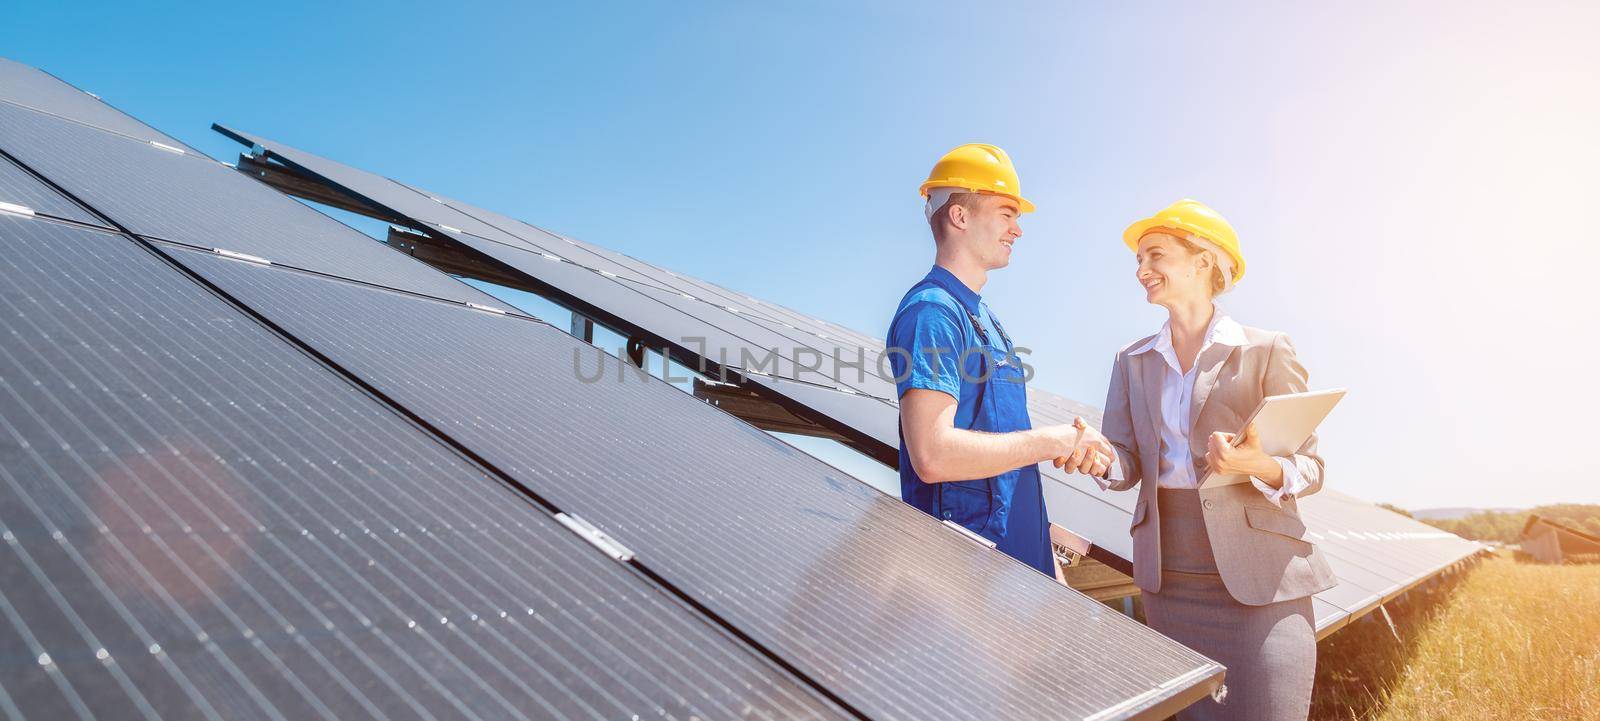 Construction worker and investor in solar power plant shaking hands by Kzenon